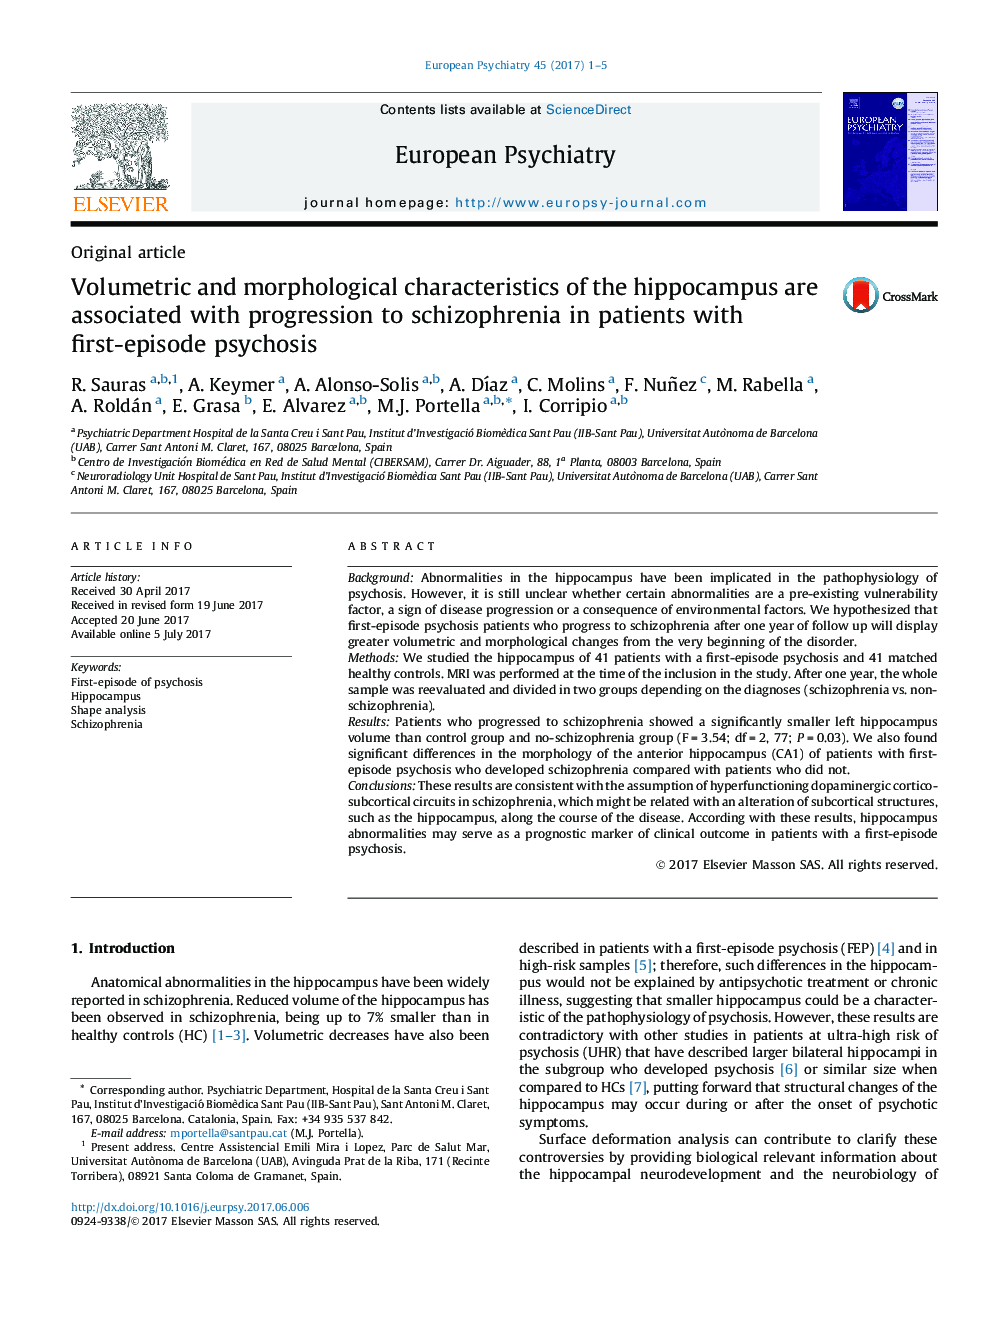 Original articleVolumetric and morphological characteristics of the hippocampus are associated with progression to schizophrenia in patients with first-episode psychosis